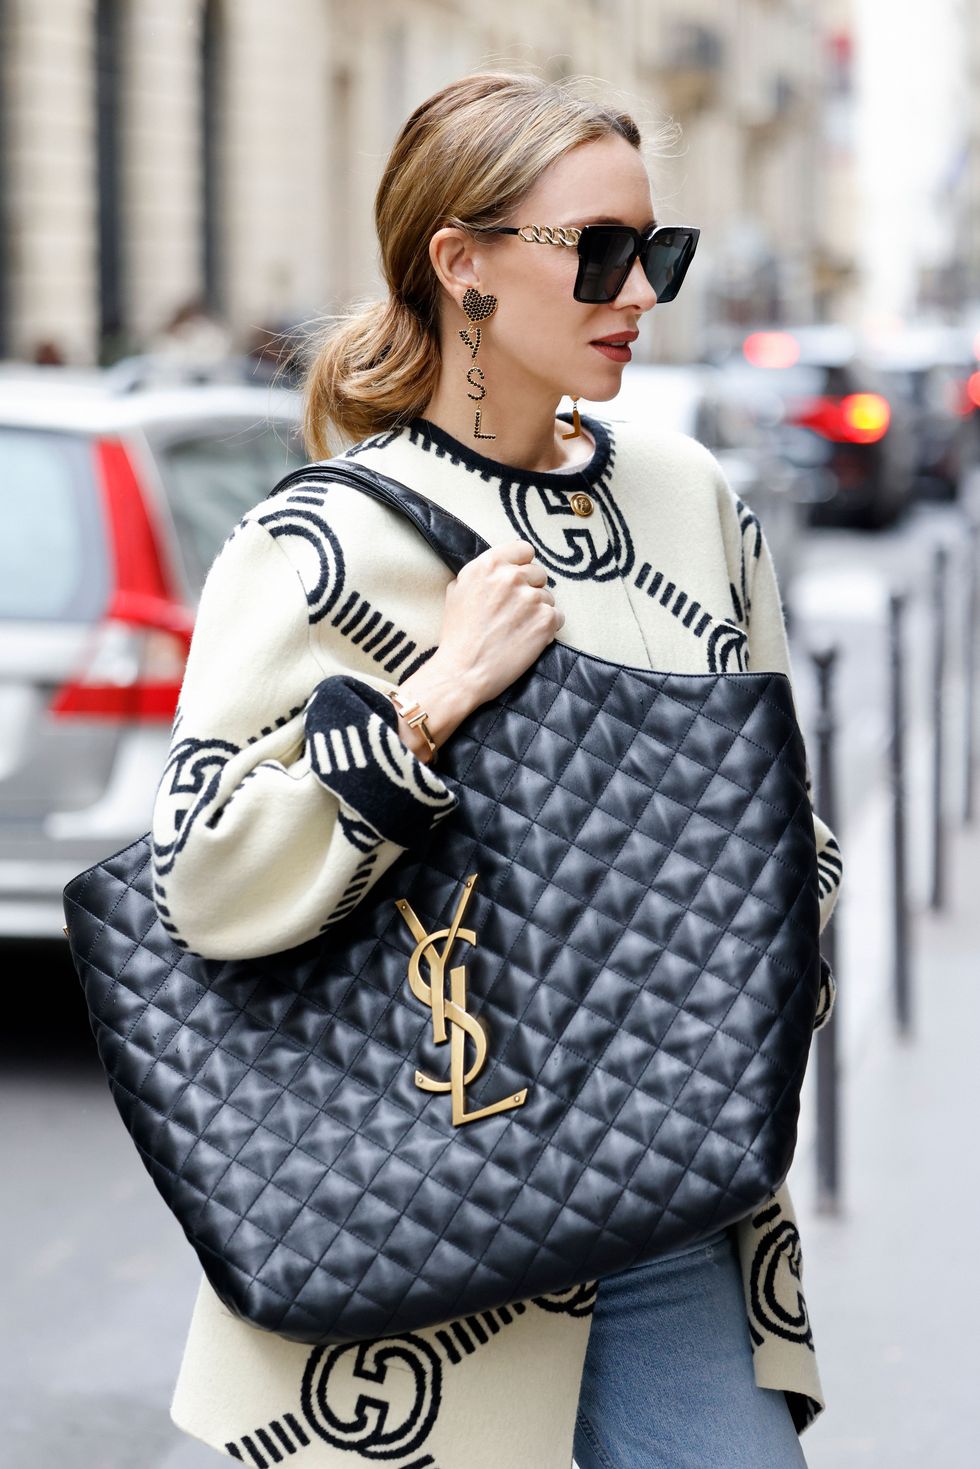 8 Celebrity Handbags That Are Trending This Summer